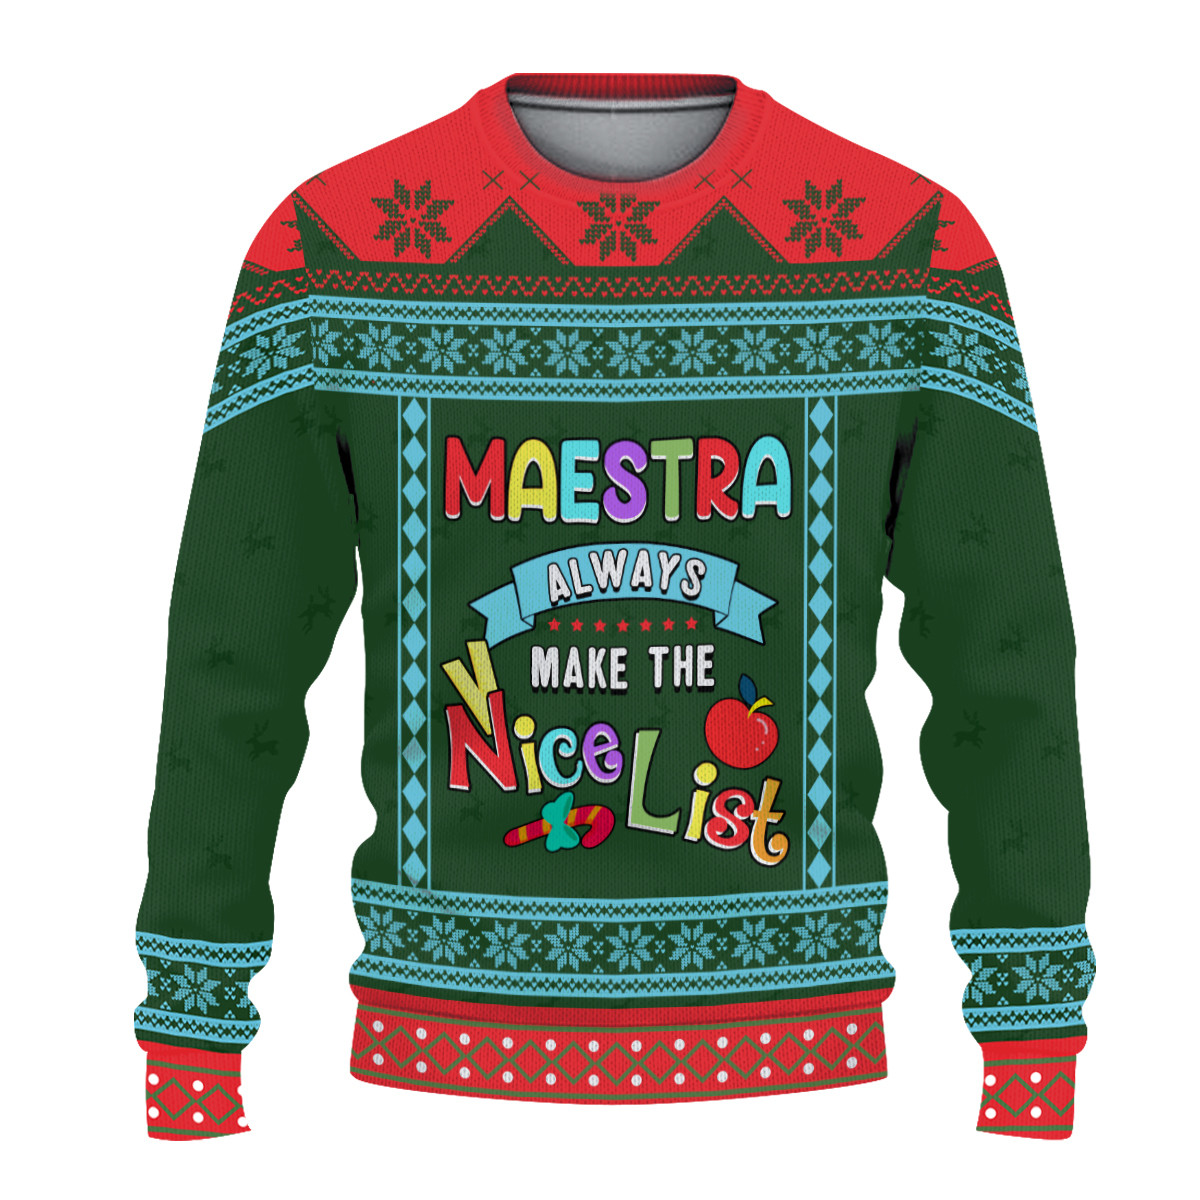 BUY NOW TOP UGLY CHRISTMAS SWEATER SO HOT IN HOLIDAY 38